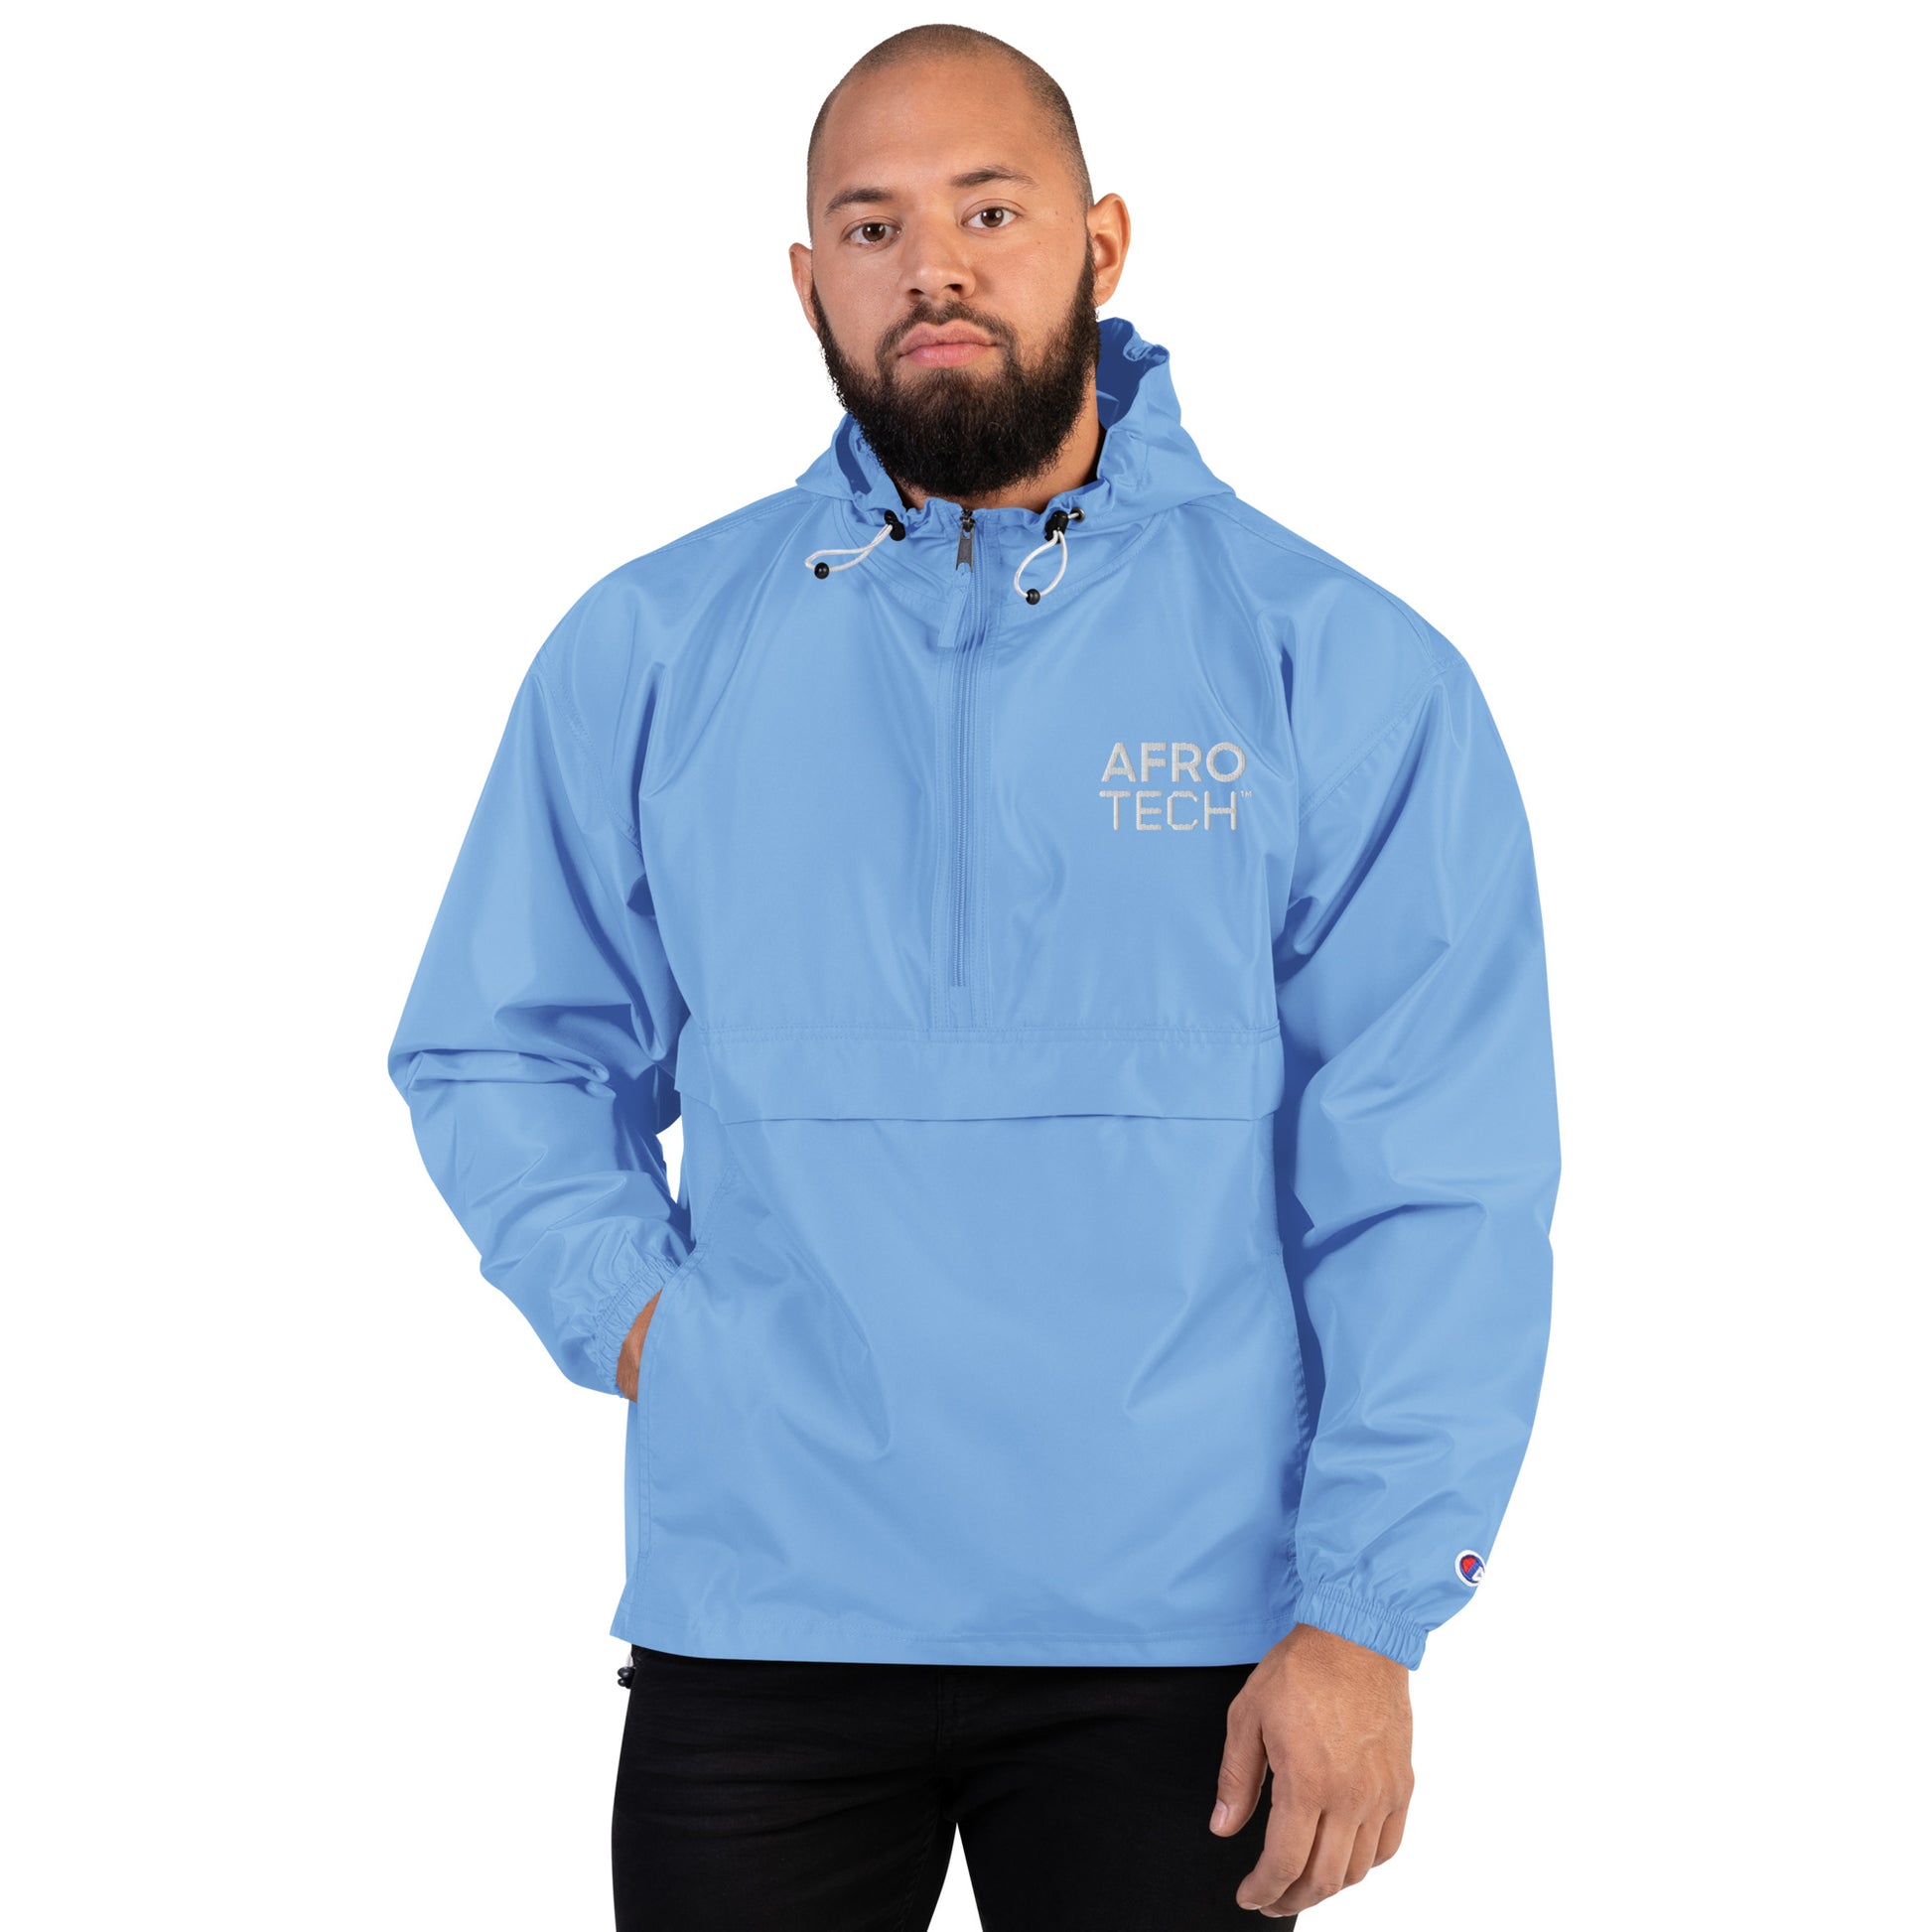 Embroidered Champion Packable Jacket – Coast Gravity Park